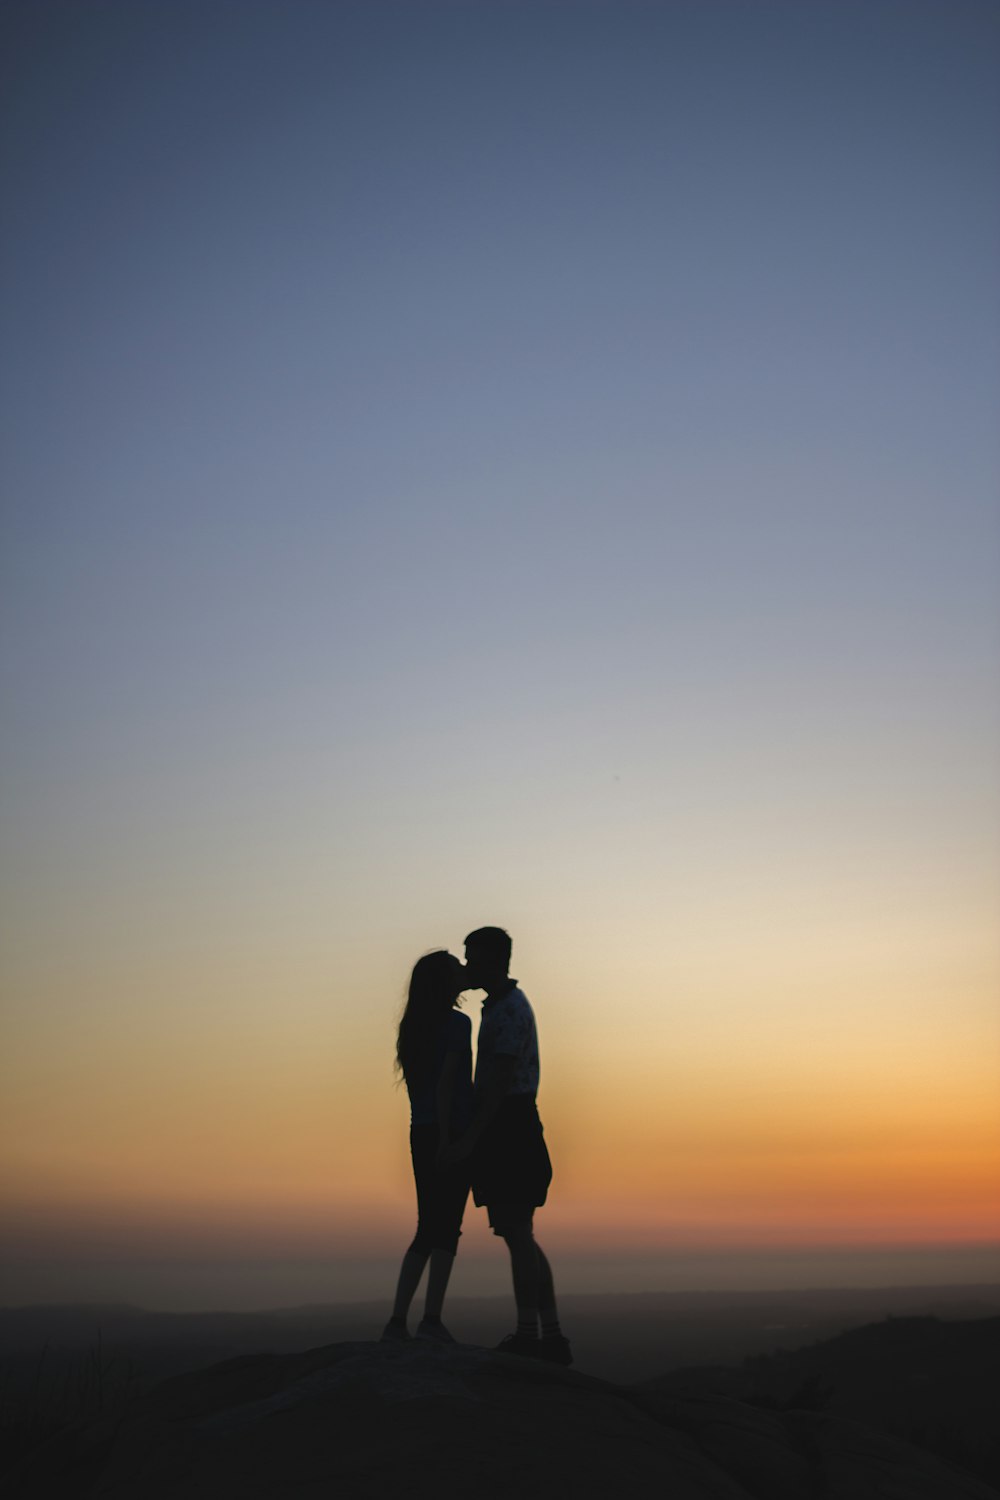 Two people kiss silhouetted against a sunset sky